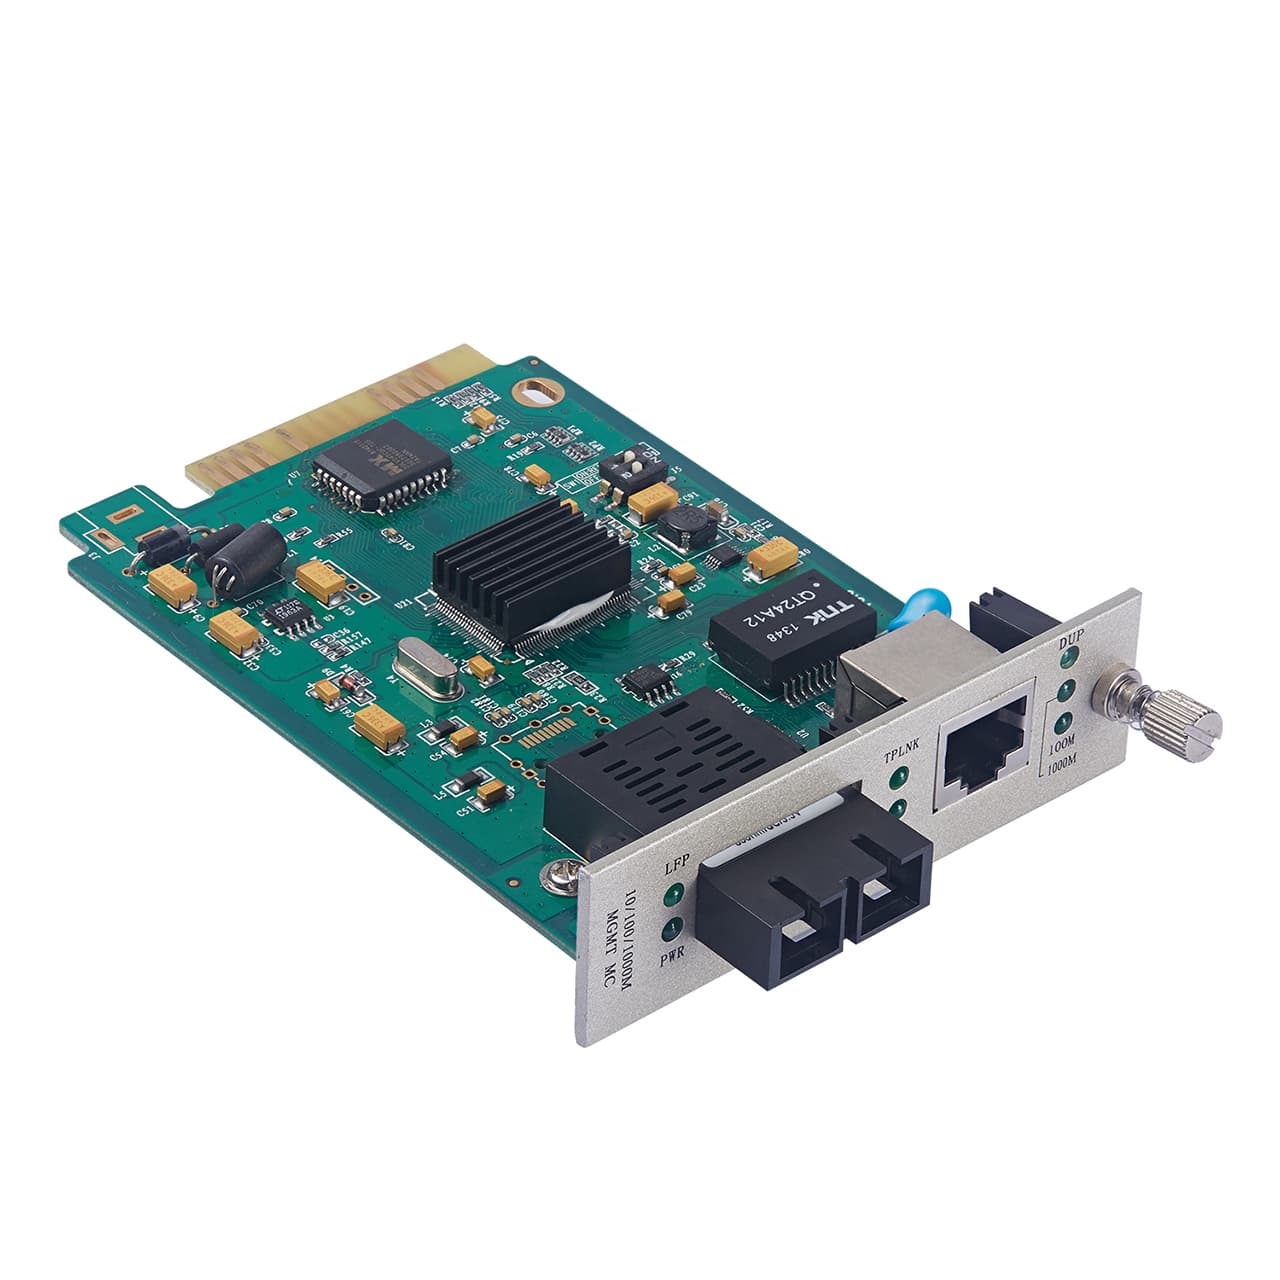 The thumbnail of 10/100/1000Base-TX to 1000Base-FX Managed GbE Media Converter Card